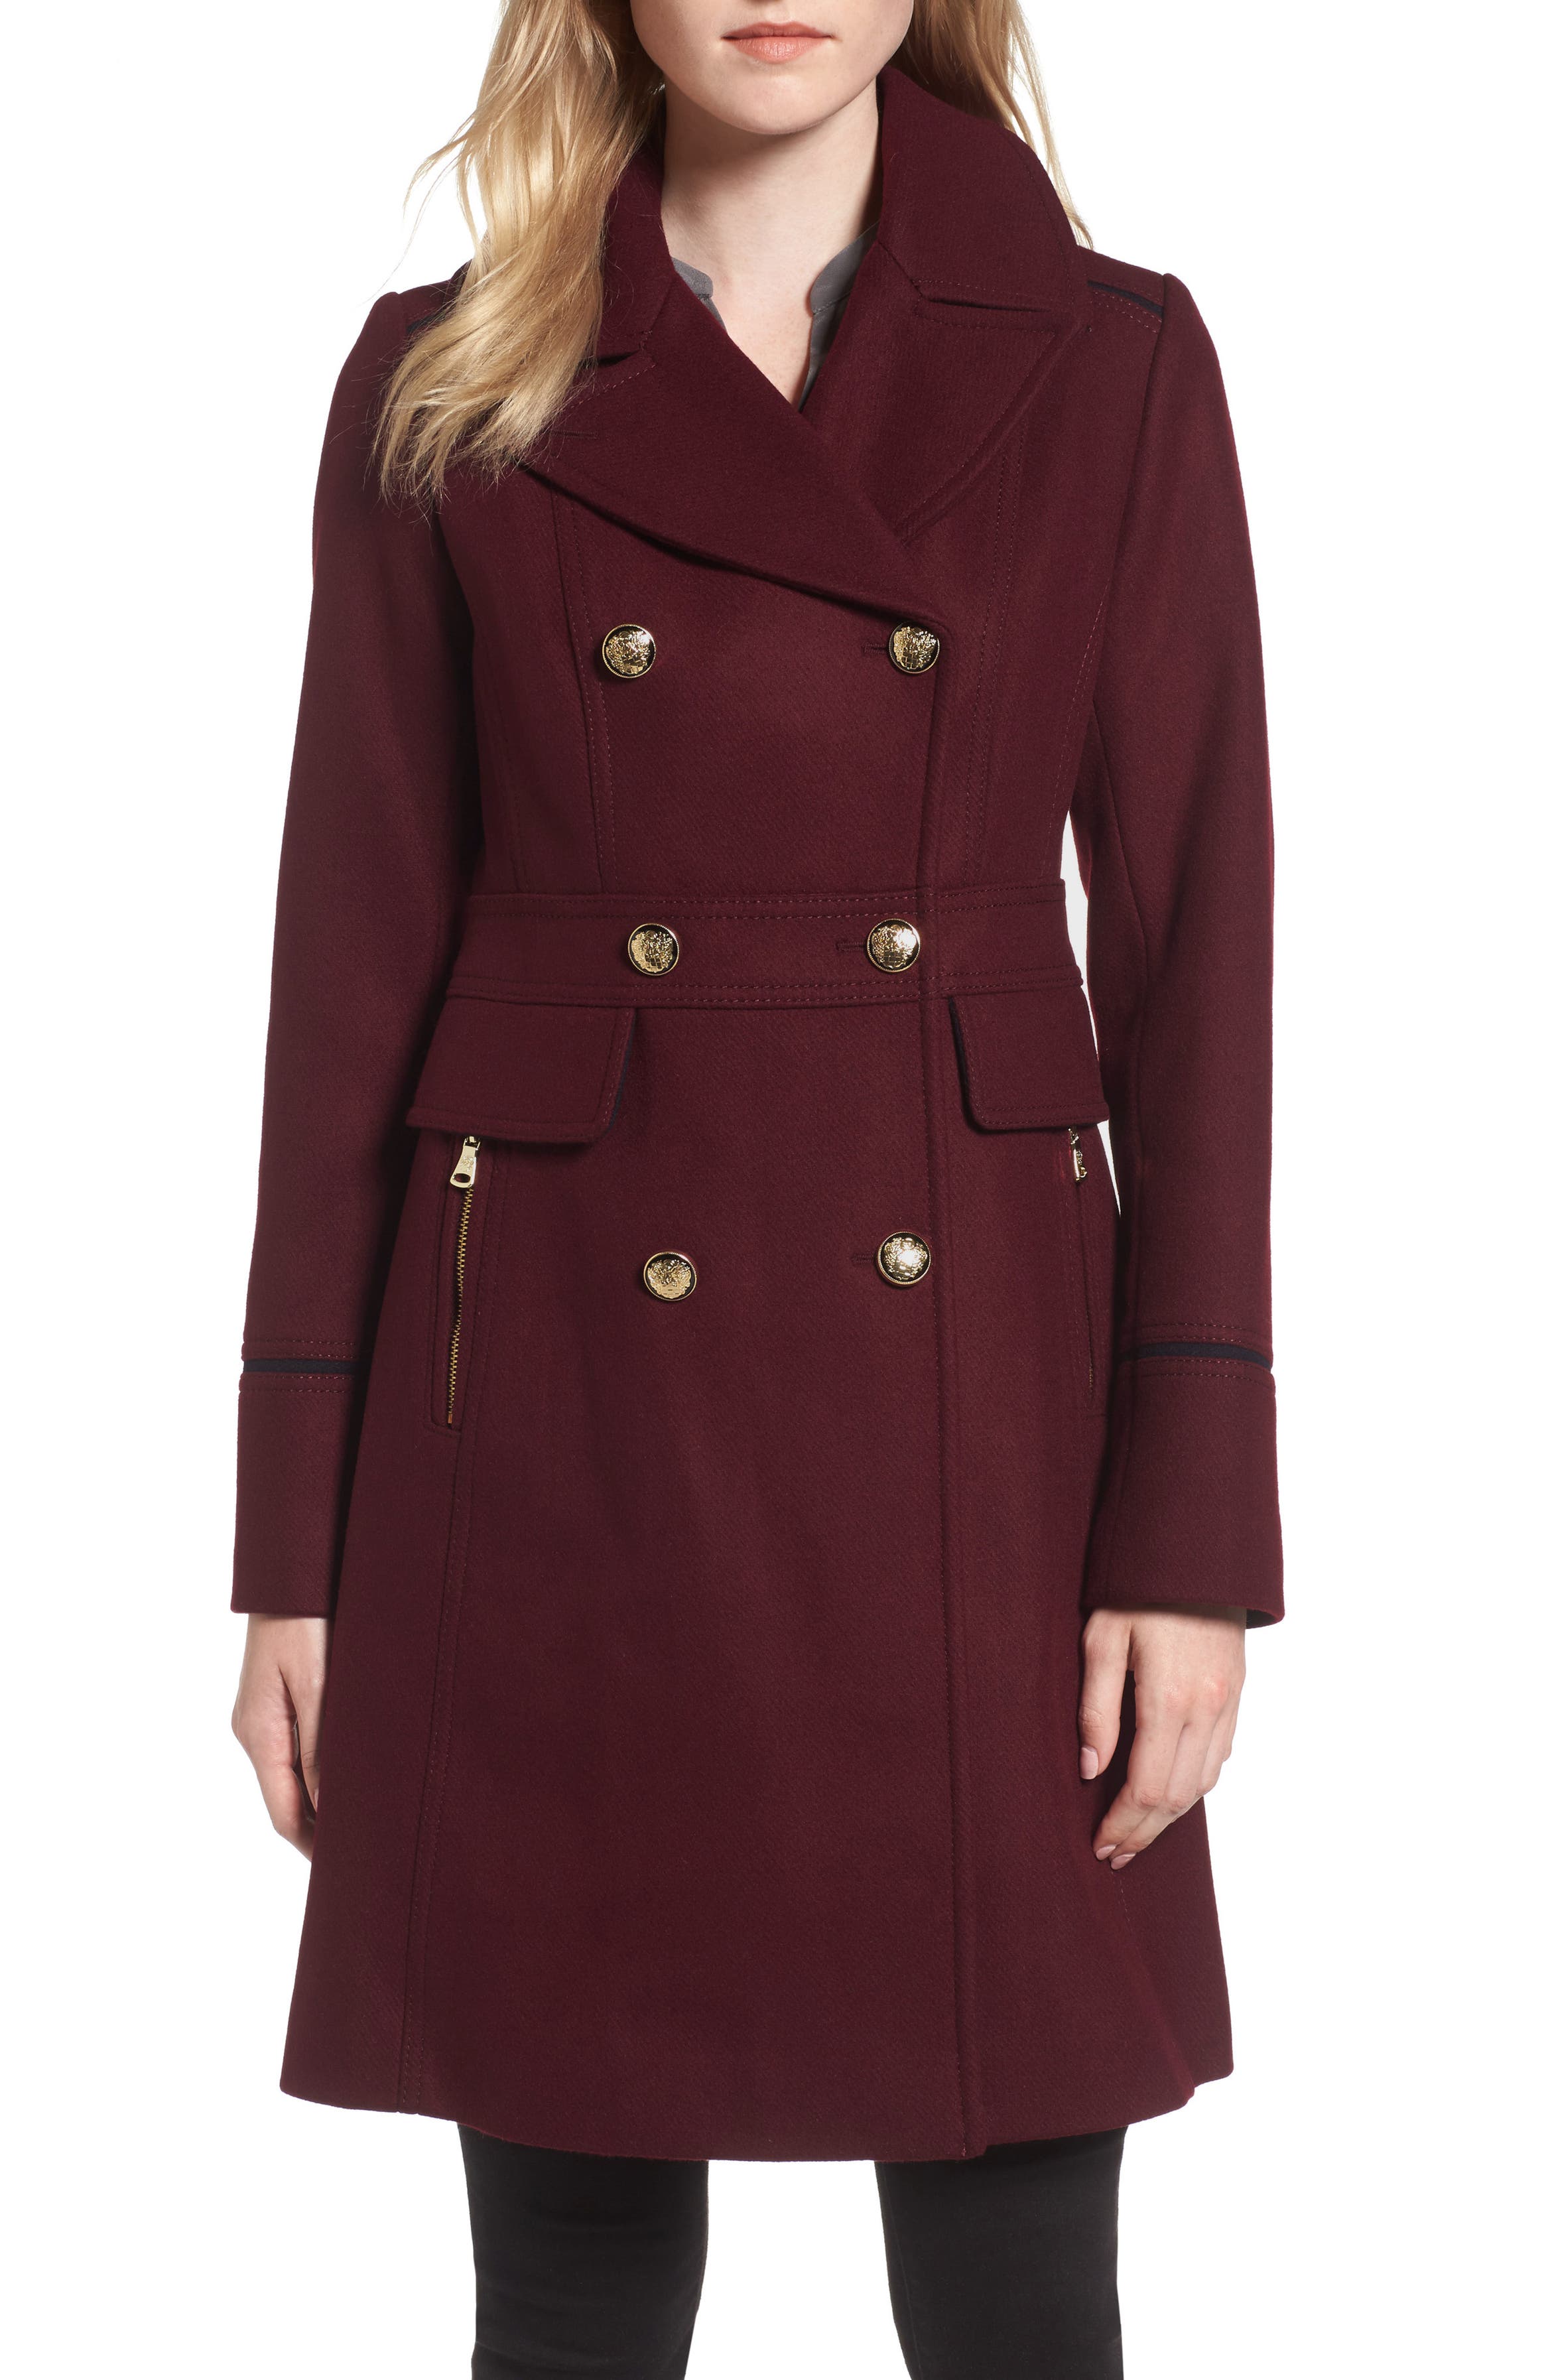 Vince Camuto Wool Blend Double Breasted Officer's Coat | Nordstrom